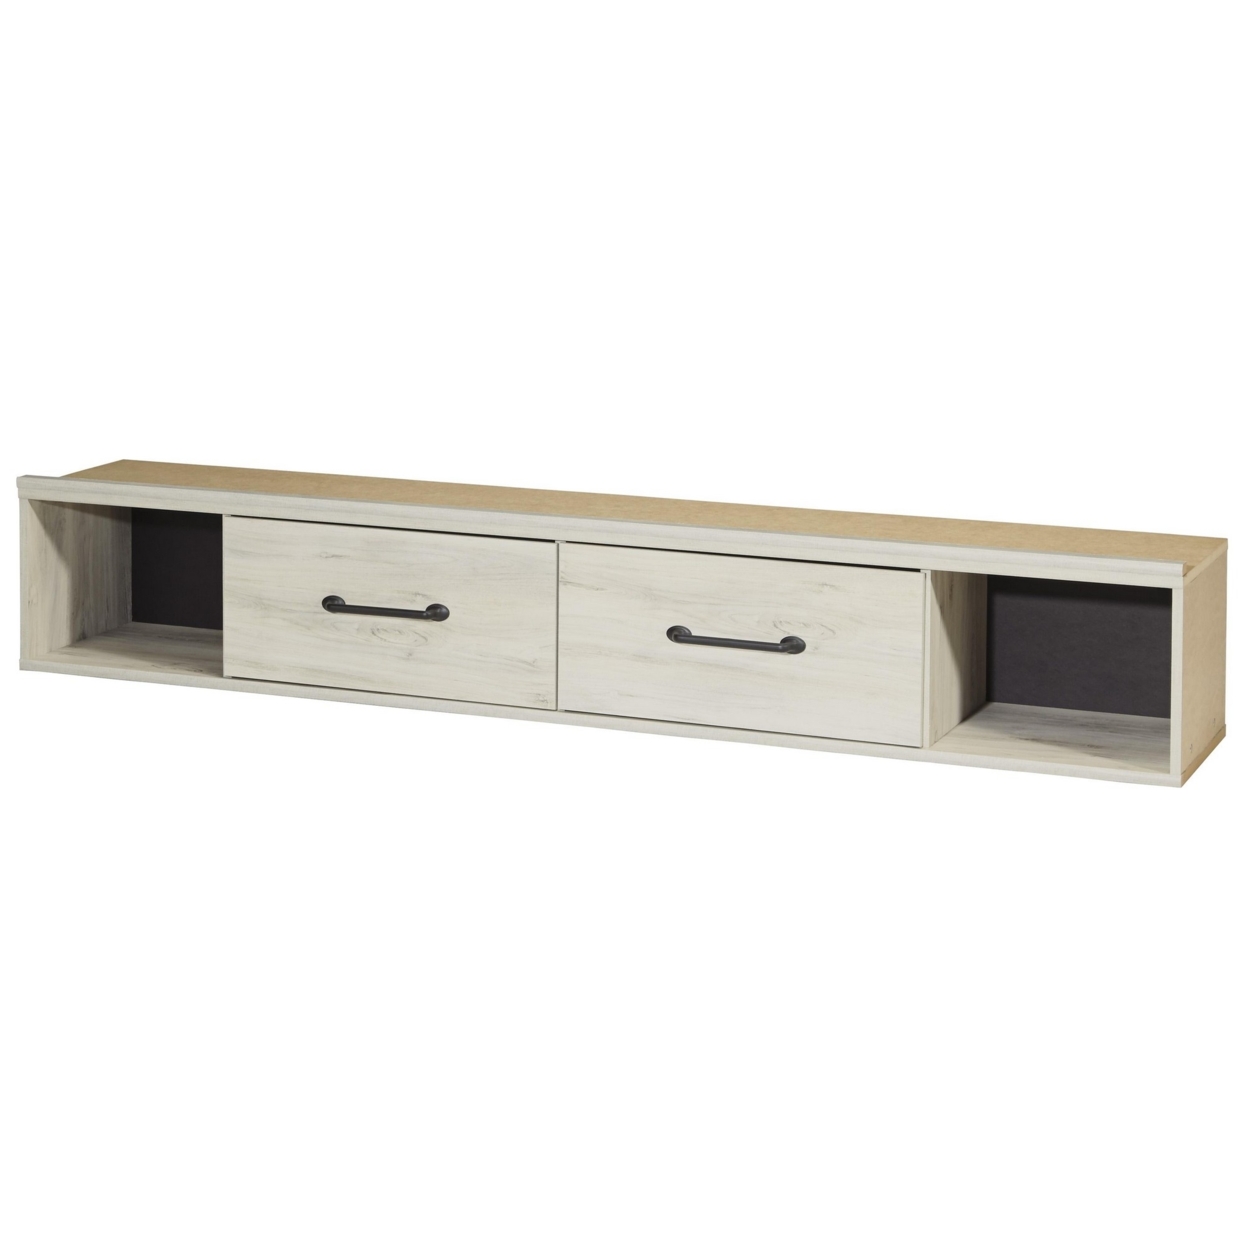 Transitional Wooden Side Wall Rail With Drawers And Open Shelves, White- Saltoro Sherpi